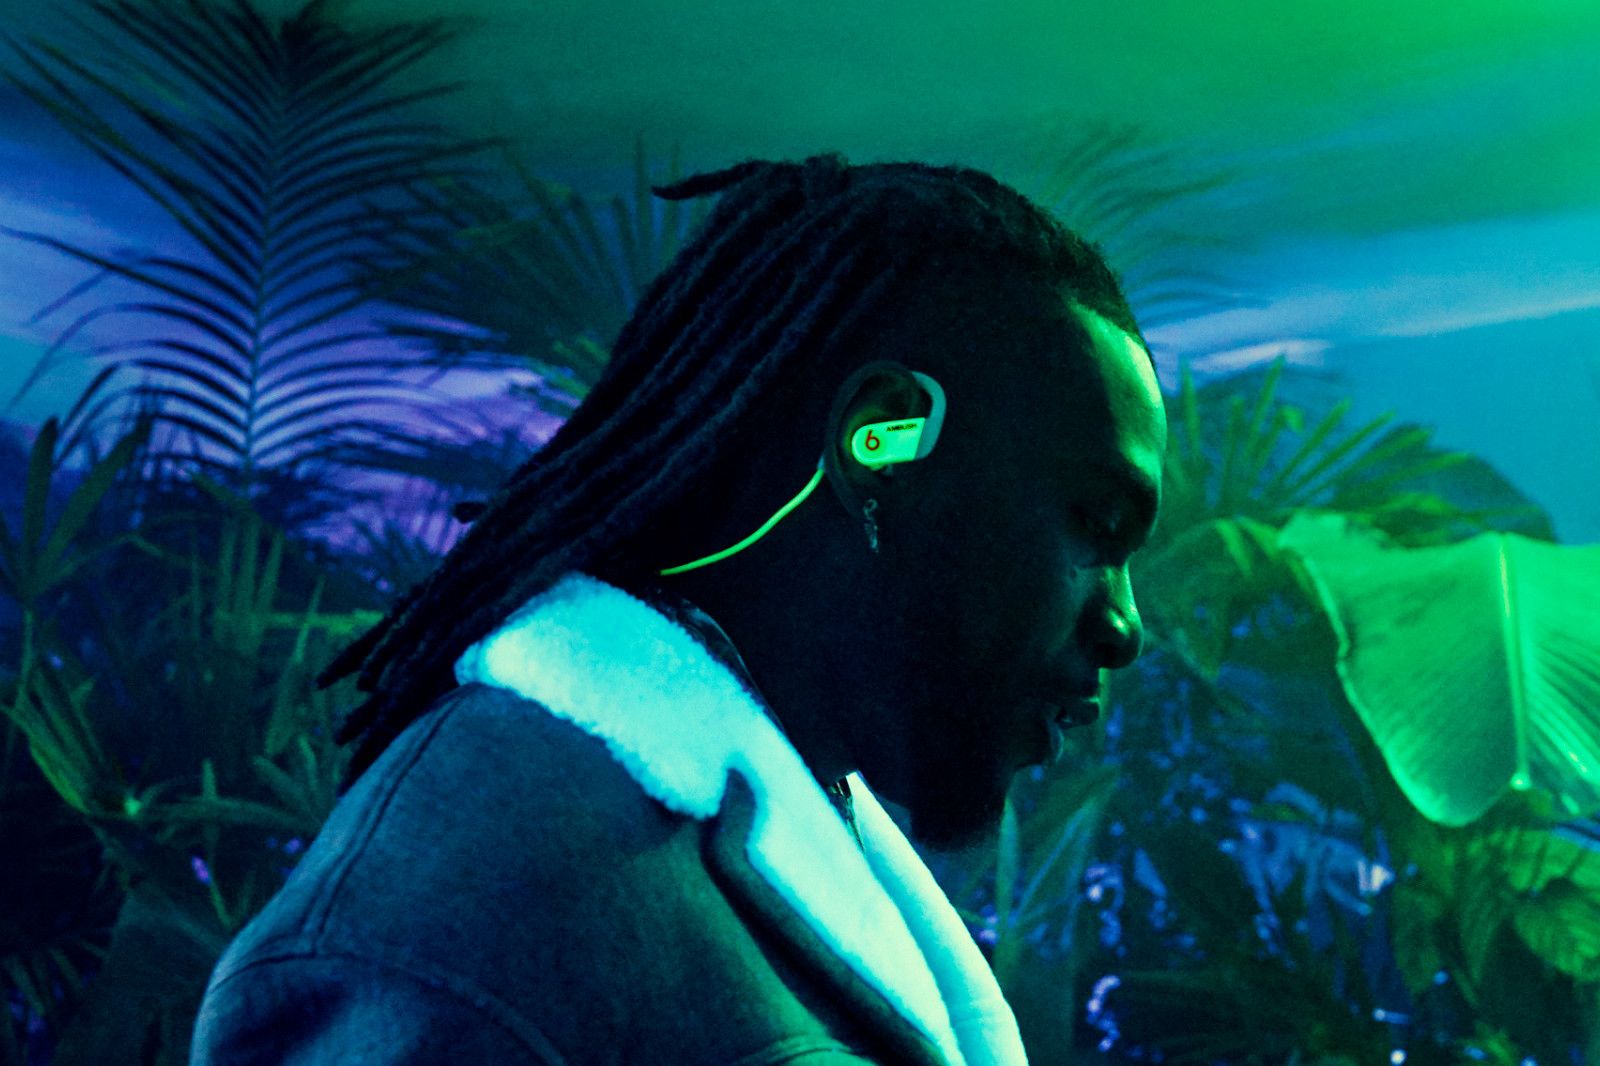 Beats launches glow-in-the-dark Powerbeats in collaboration with fashion brand, Ambush photo 1